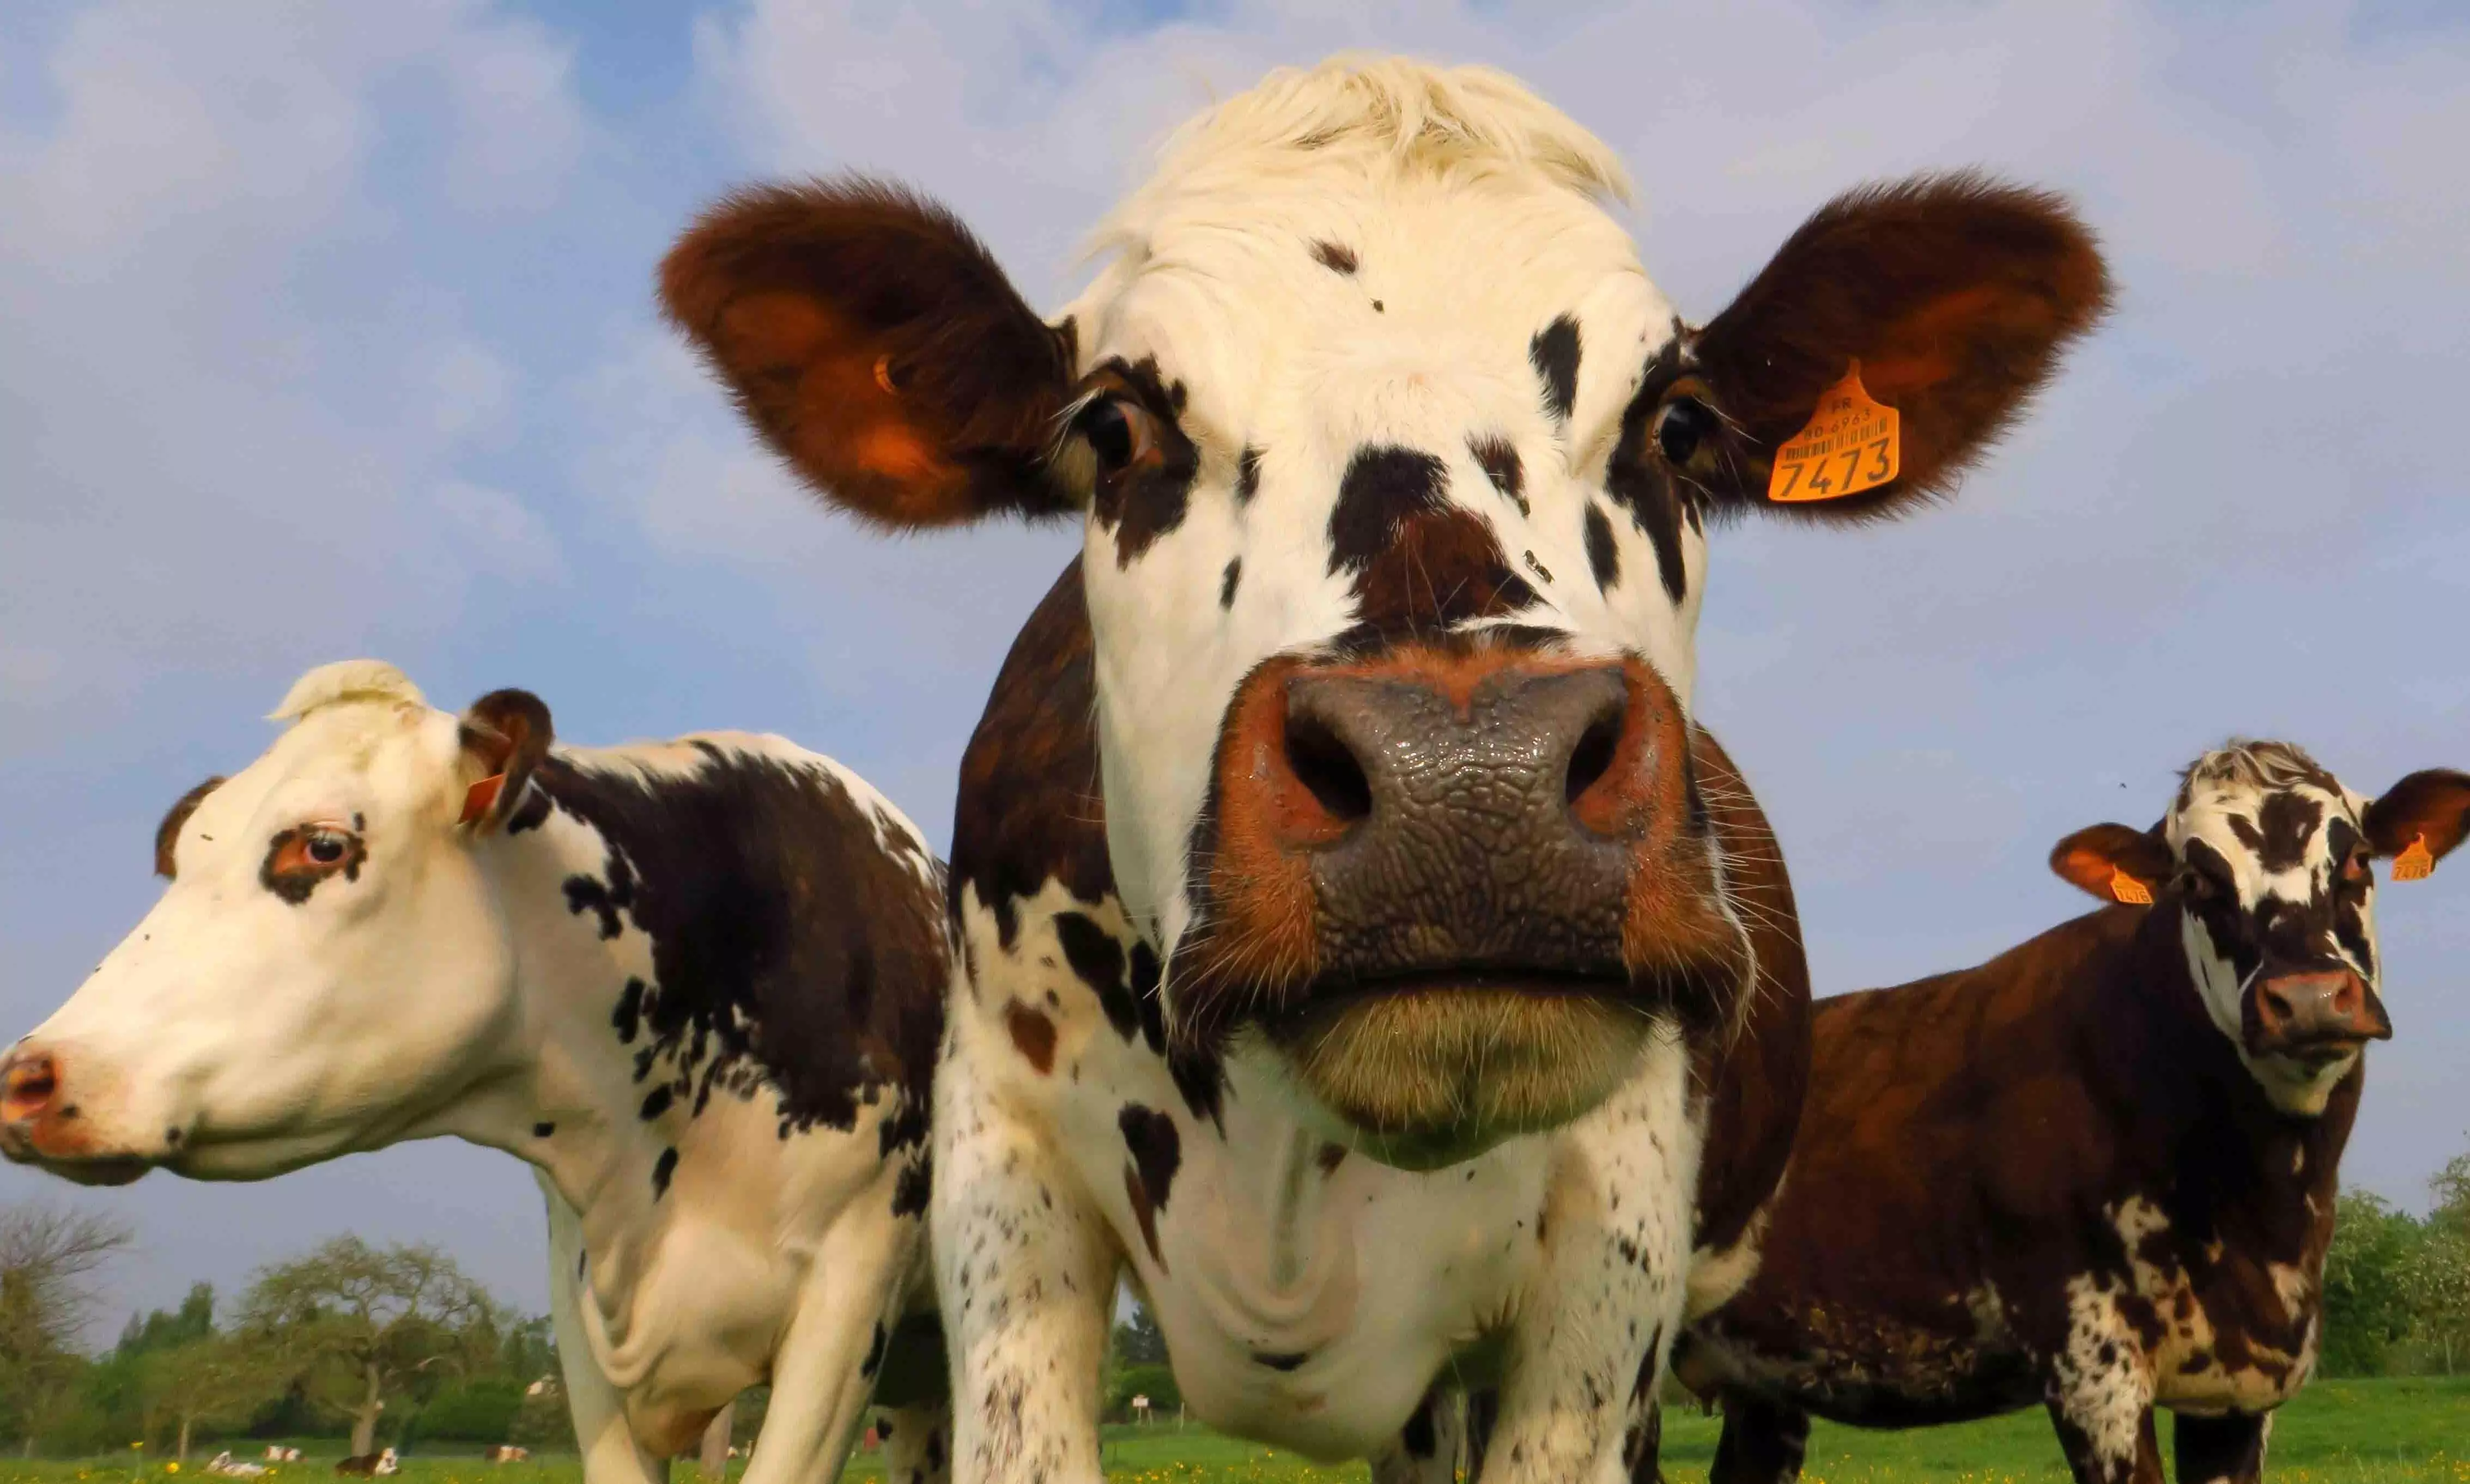 Gas Giants: Cows Emit Dangerous Amounts of Methane. Can We Stop Them?